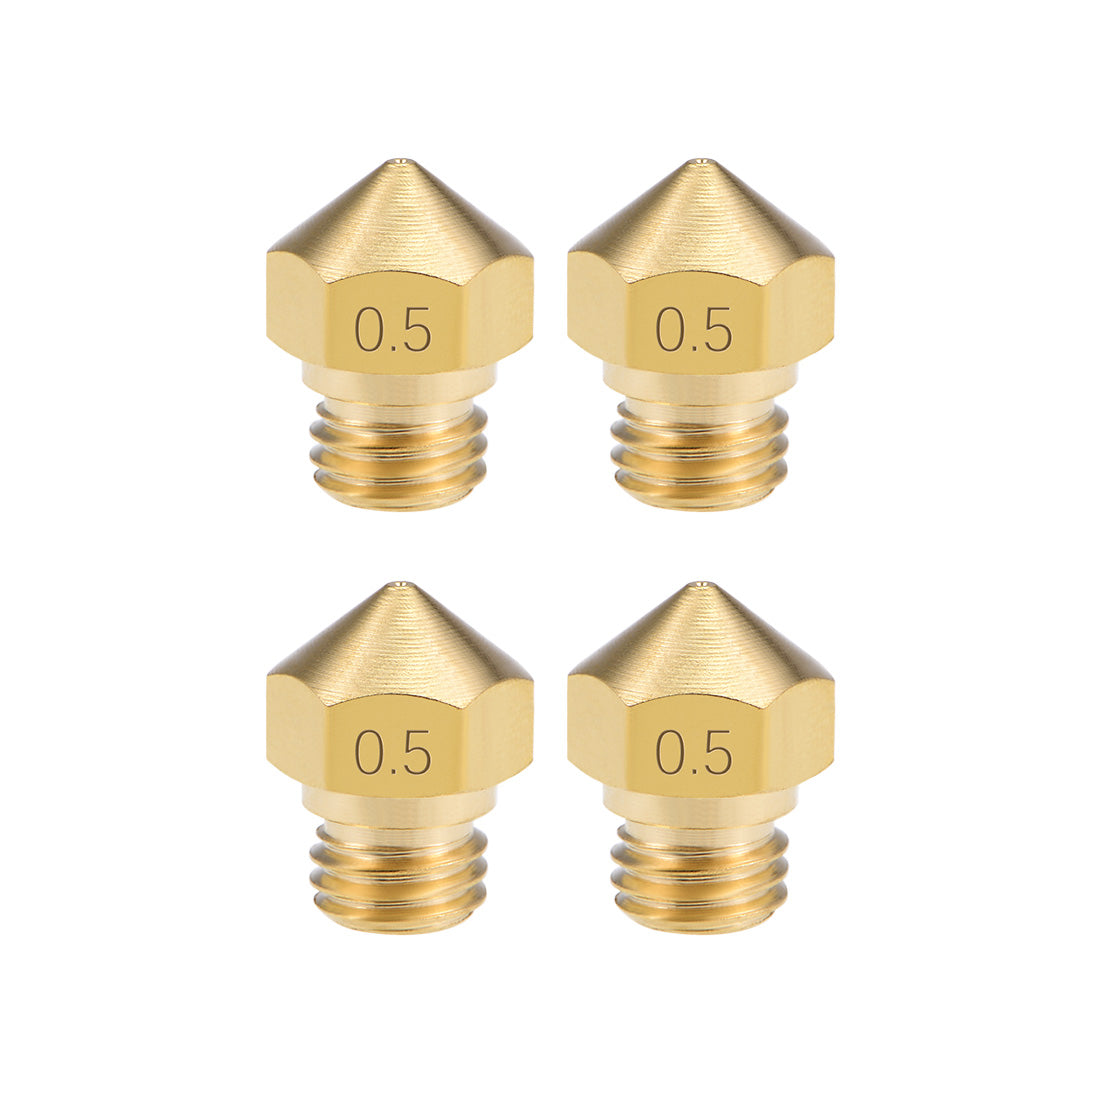 uxcell Uxcell 0.5mm 3D Printer Nozzle Head M7 for MK10 1.75mm Extruder Print, Brass 4pcs